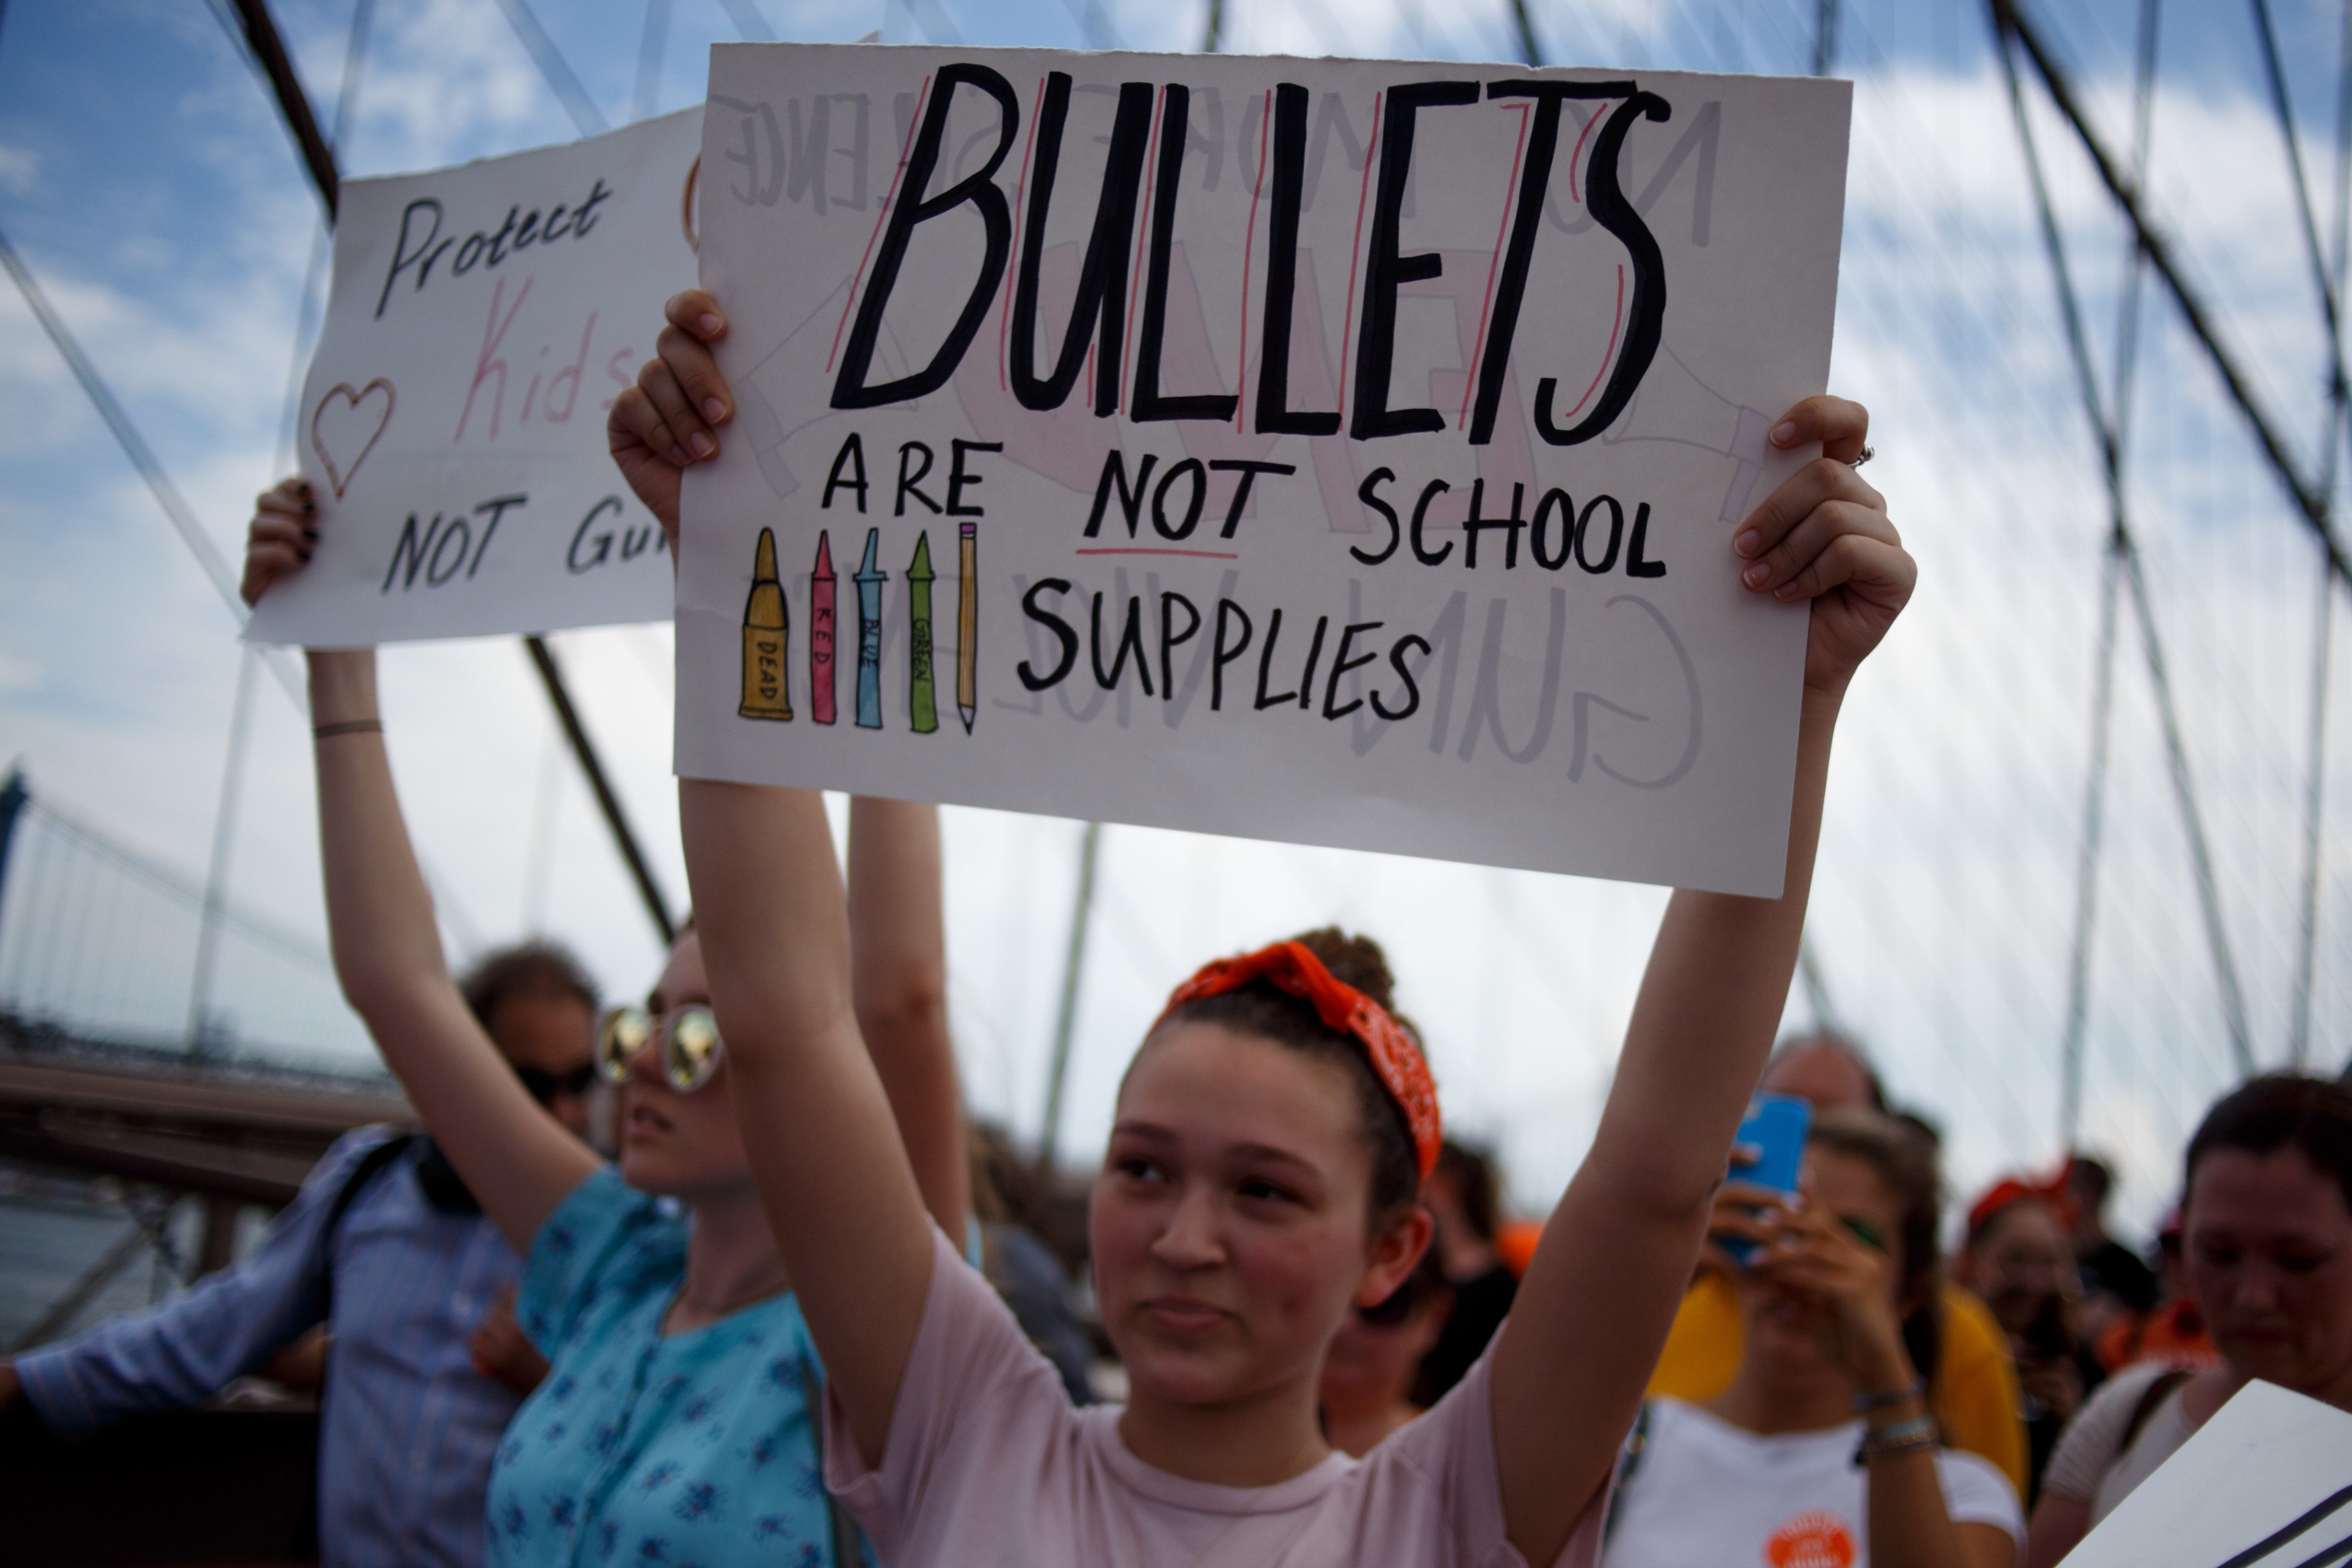 Activists seeking an end to gun violence in American schools